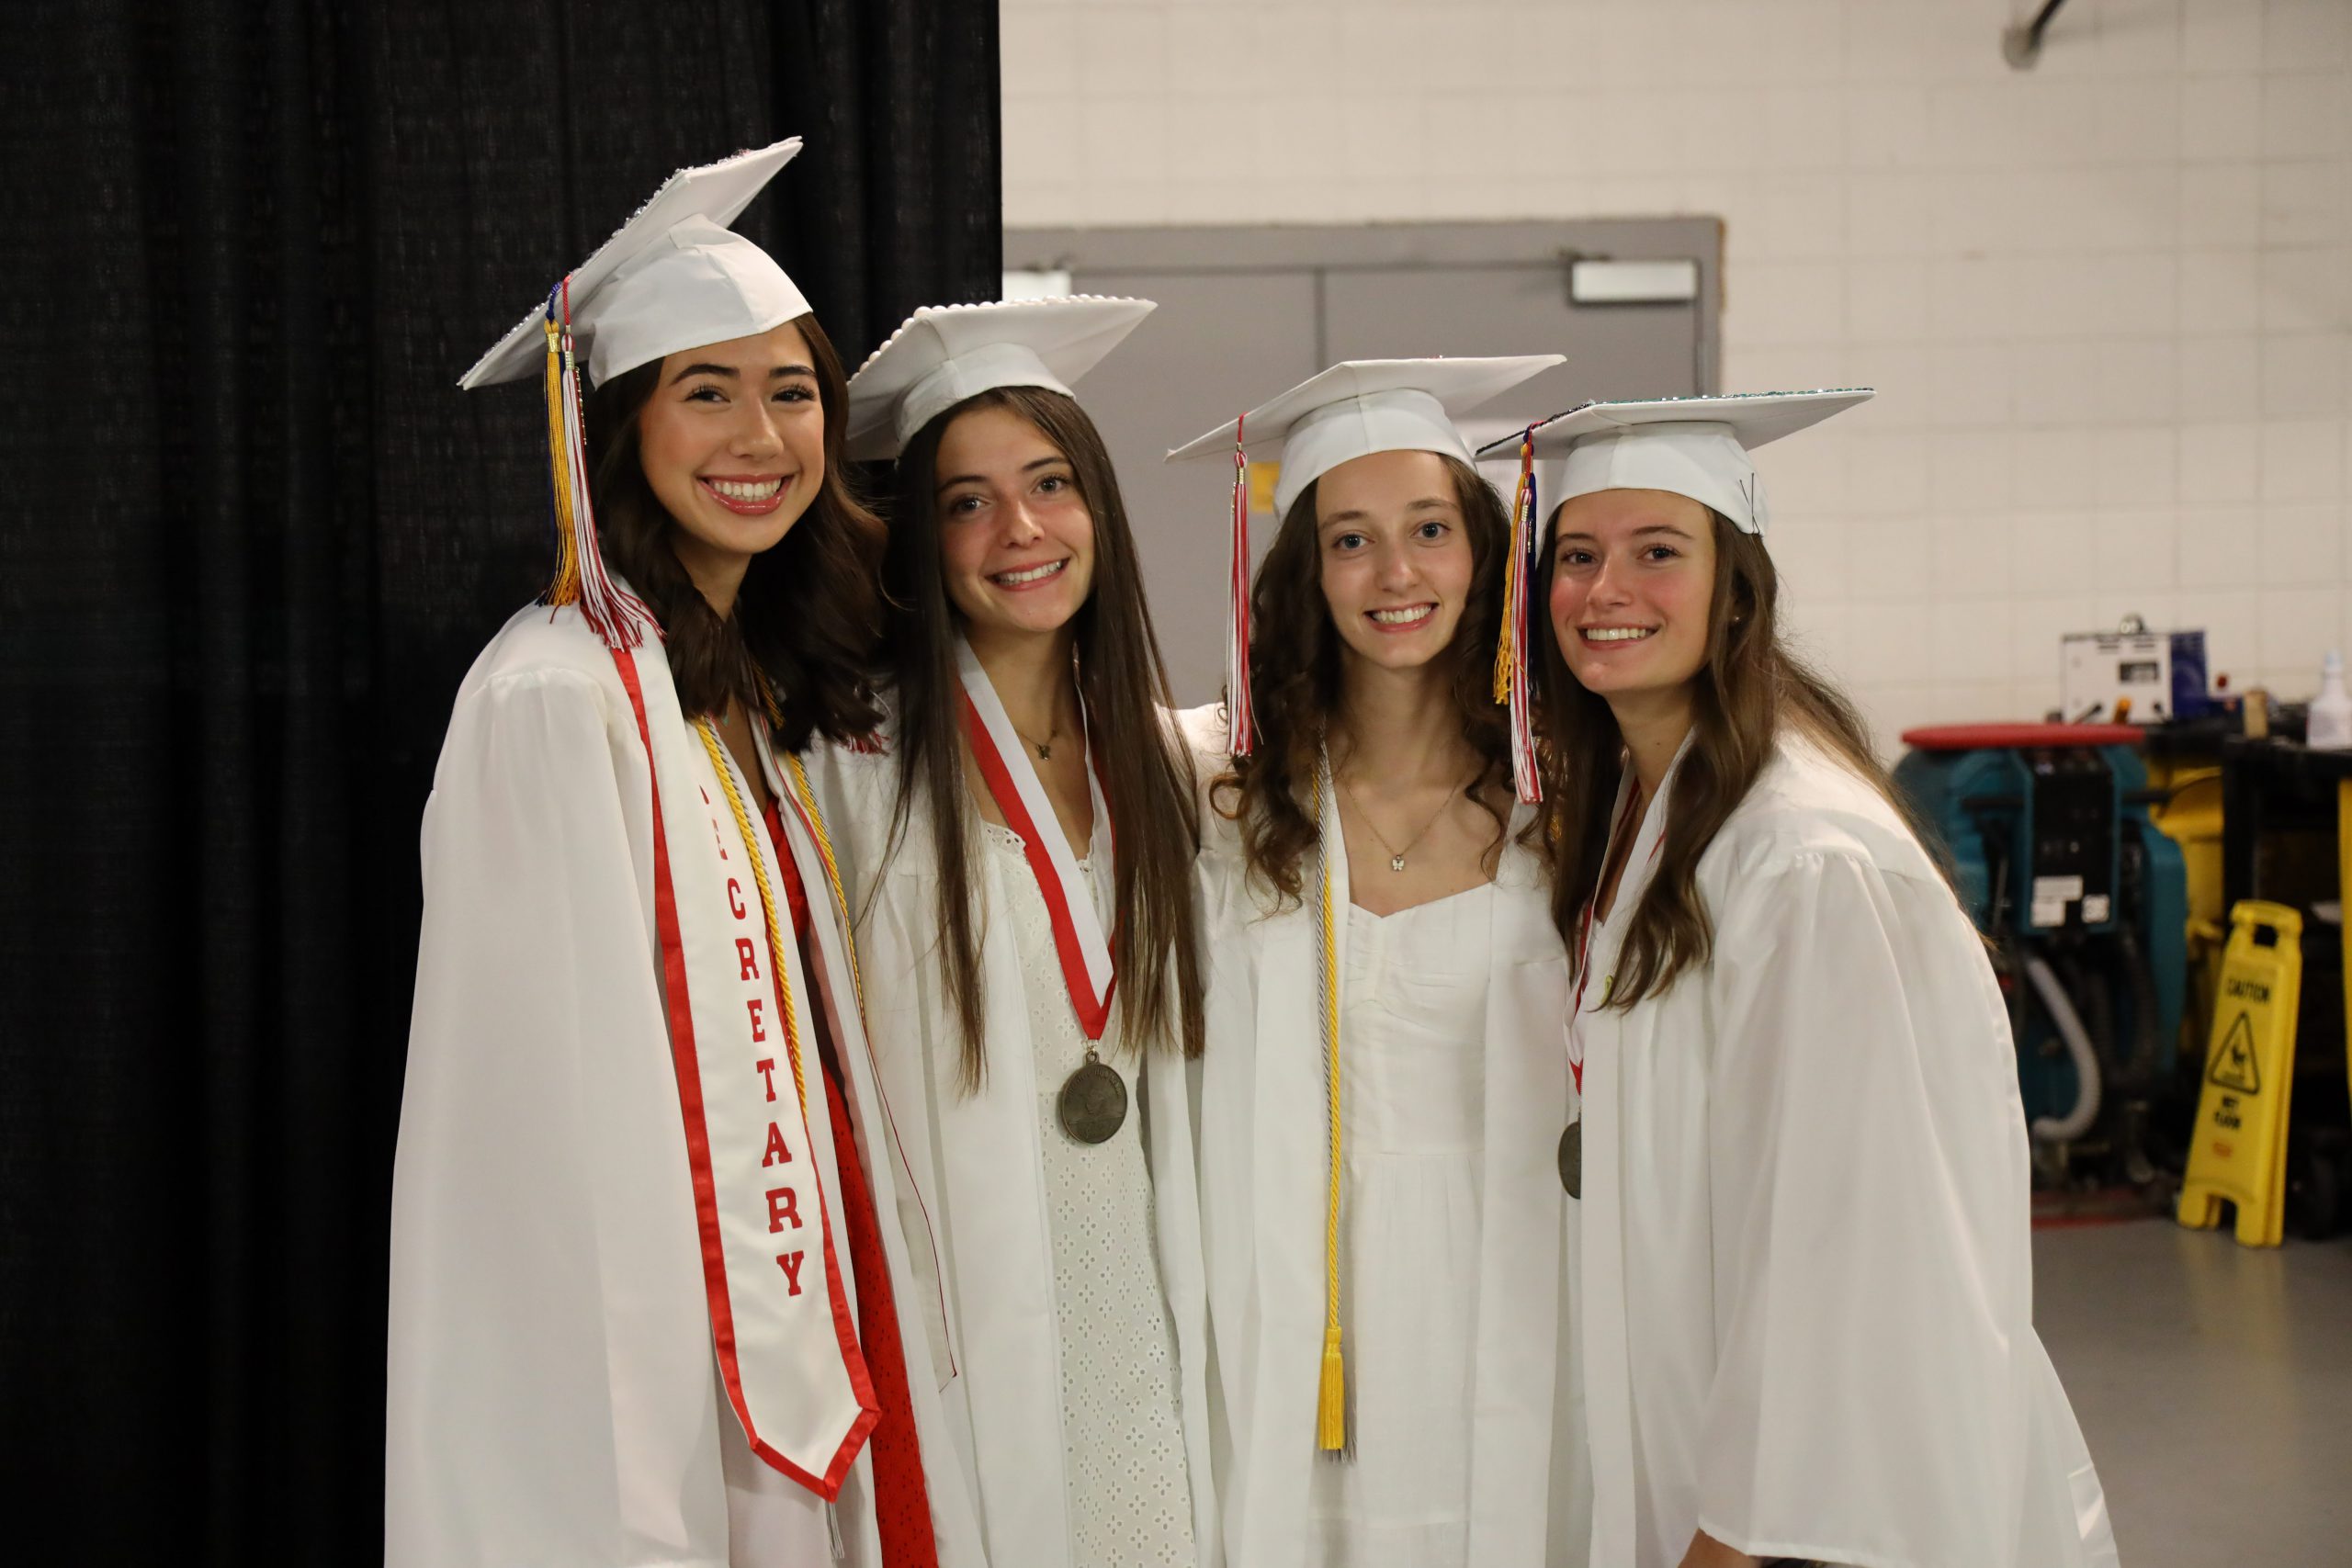 Four female graduates wearing white caps and gowns are smiling for a group photo together.